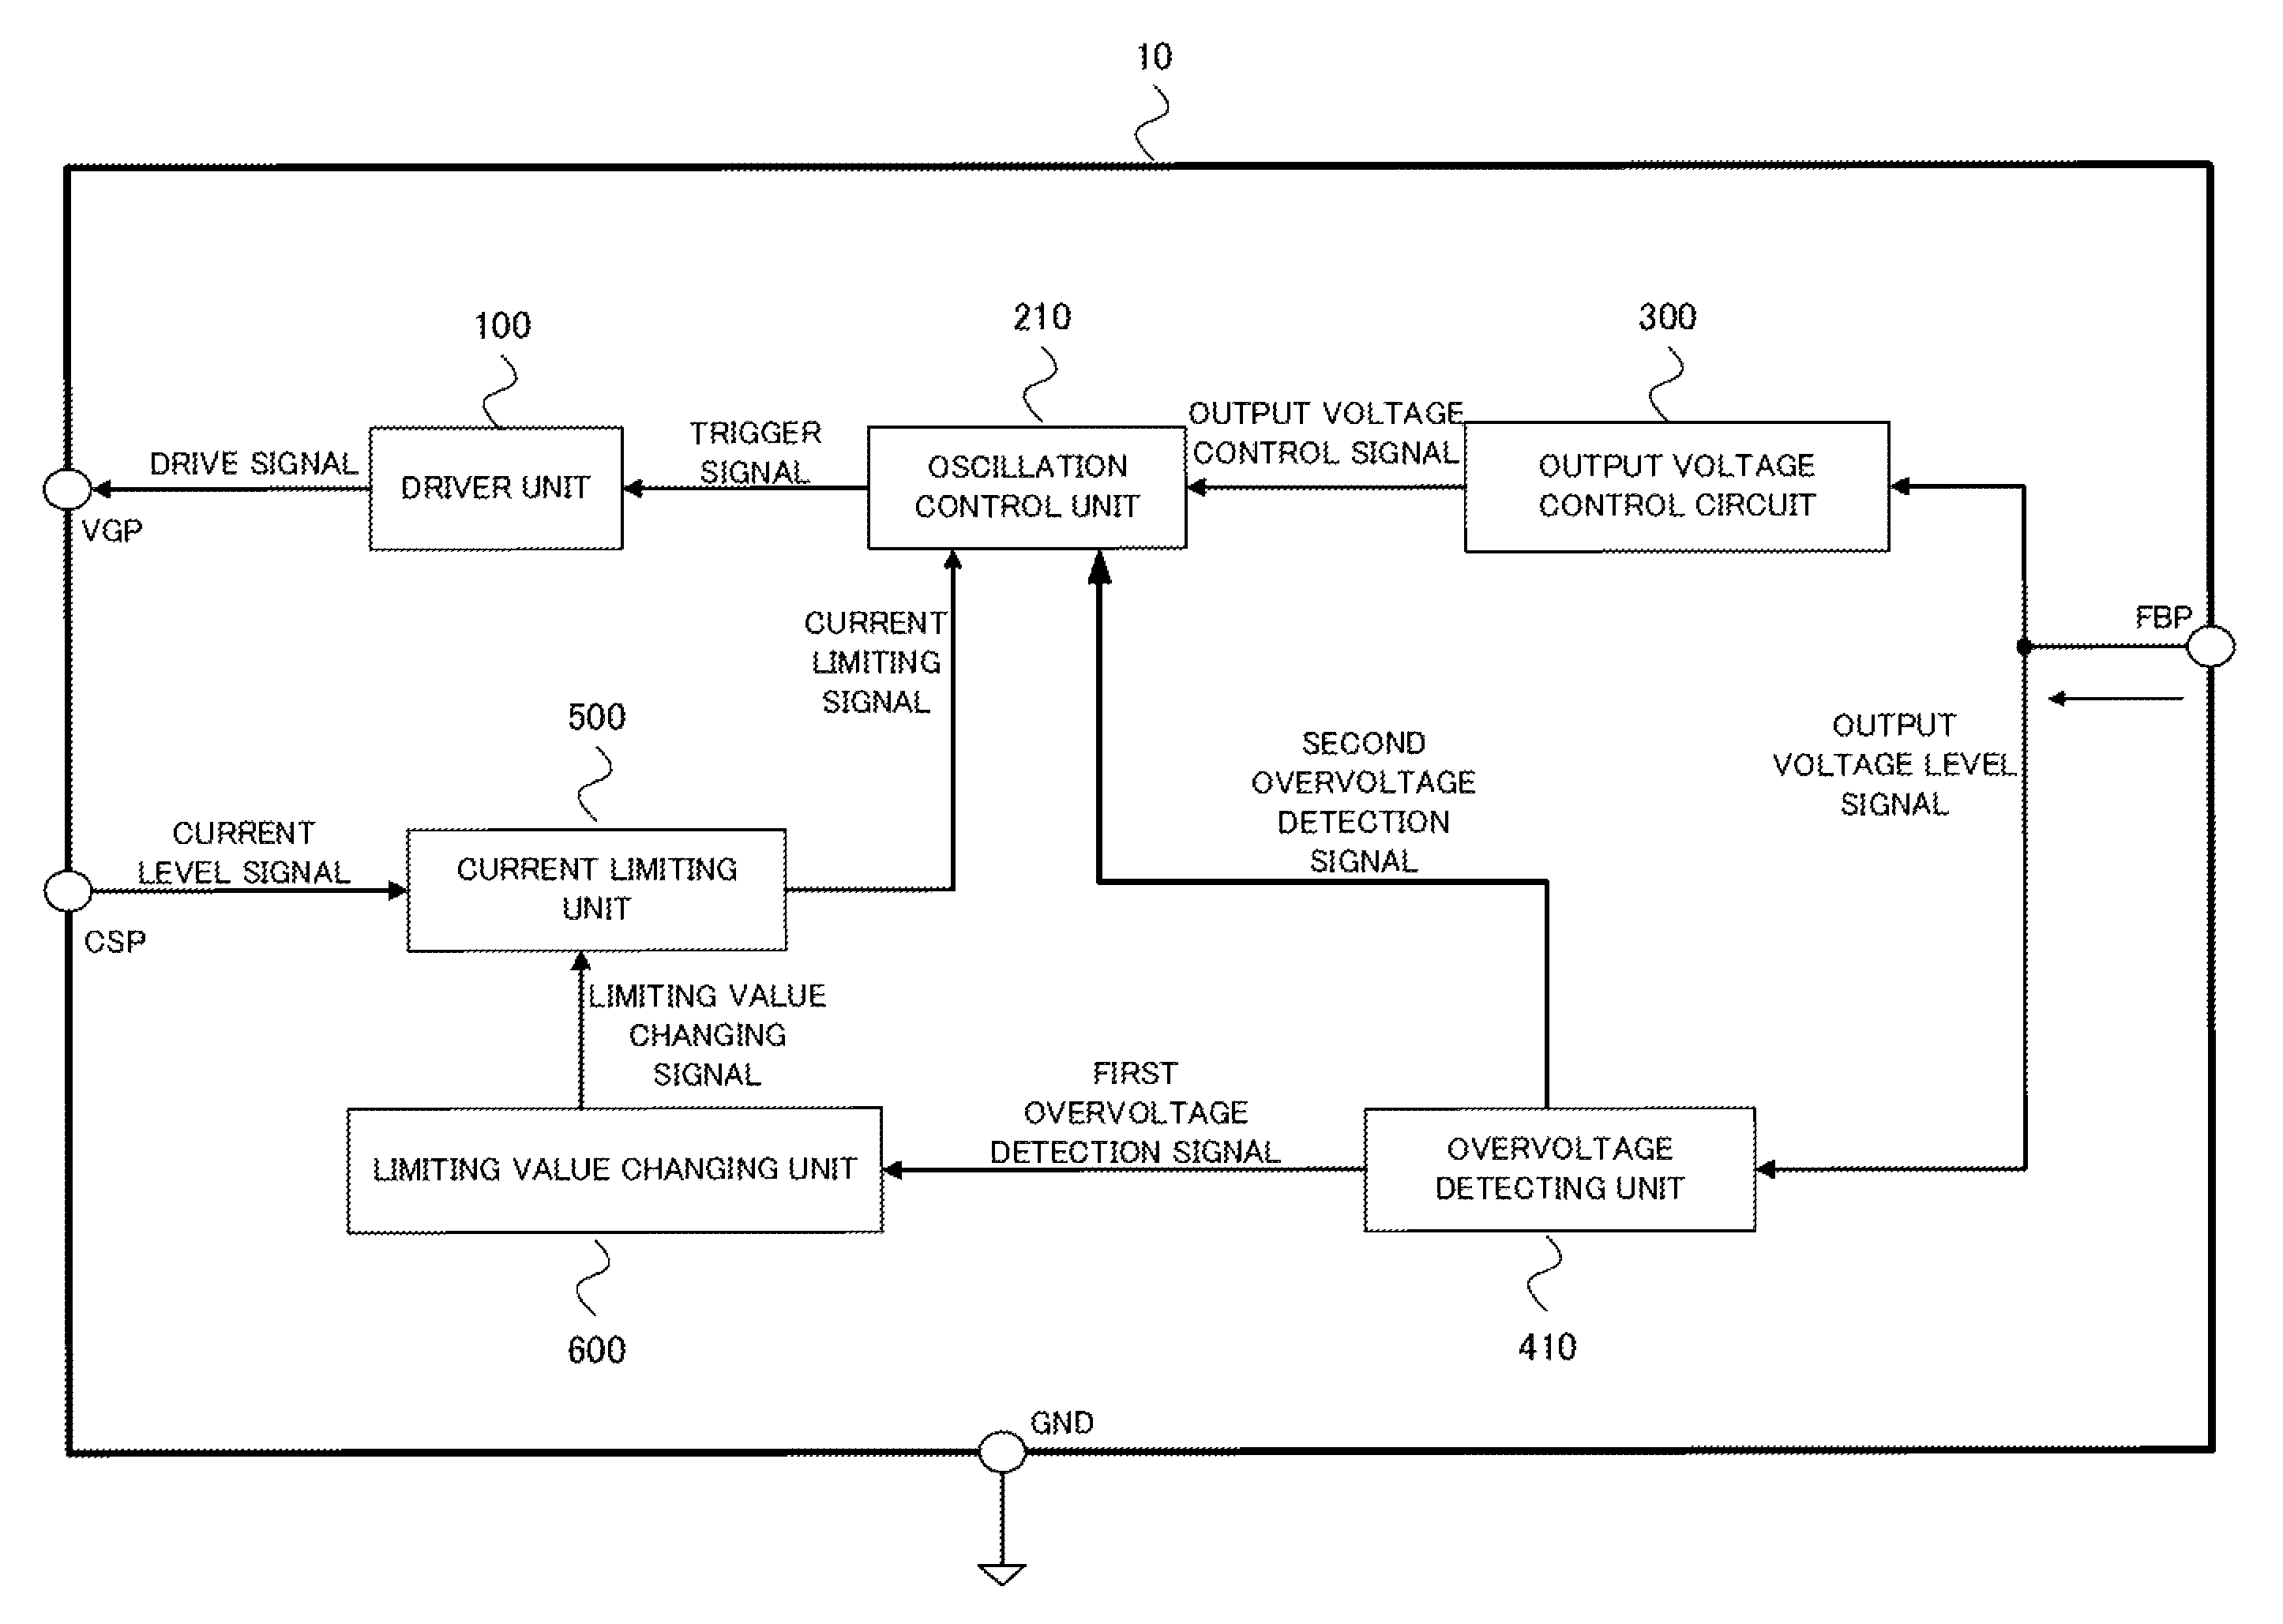 Power factor correction circuit for providing protection against overvoltage